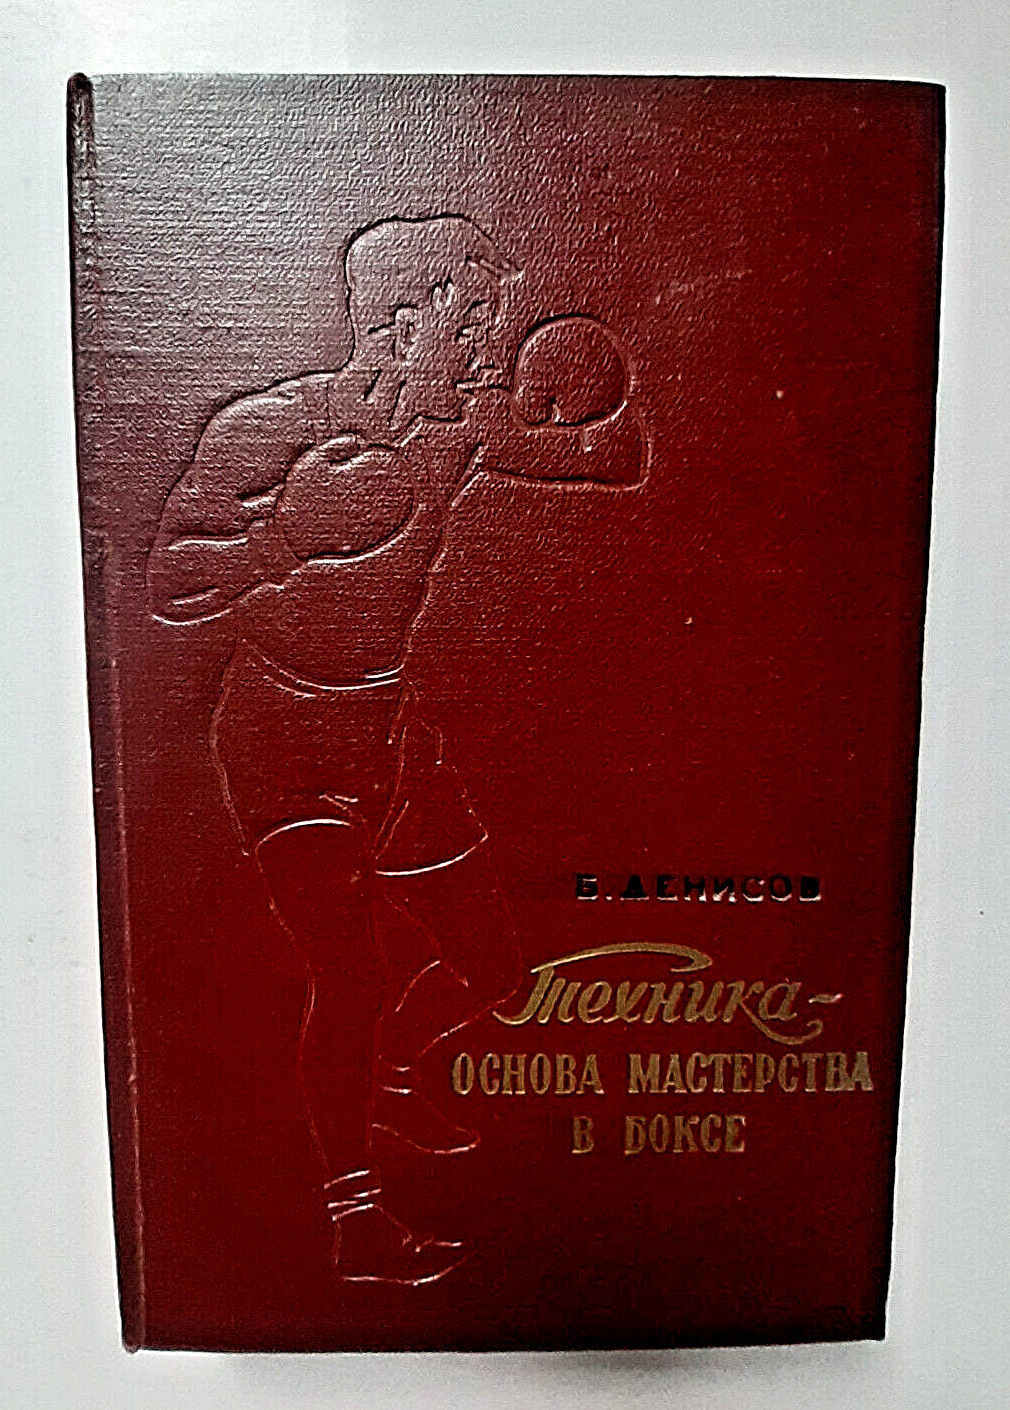 1957 Box Technique is the basis of mastery in boxing Denisov rare Russian book